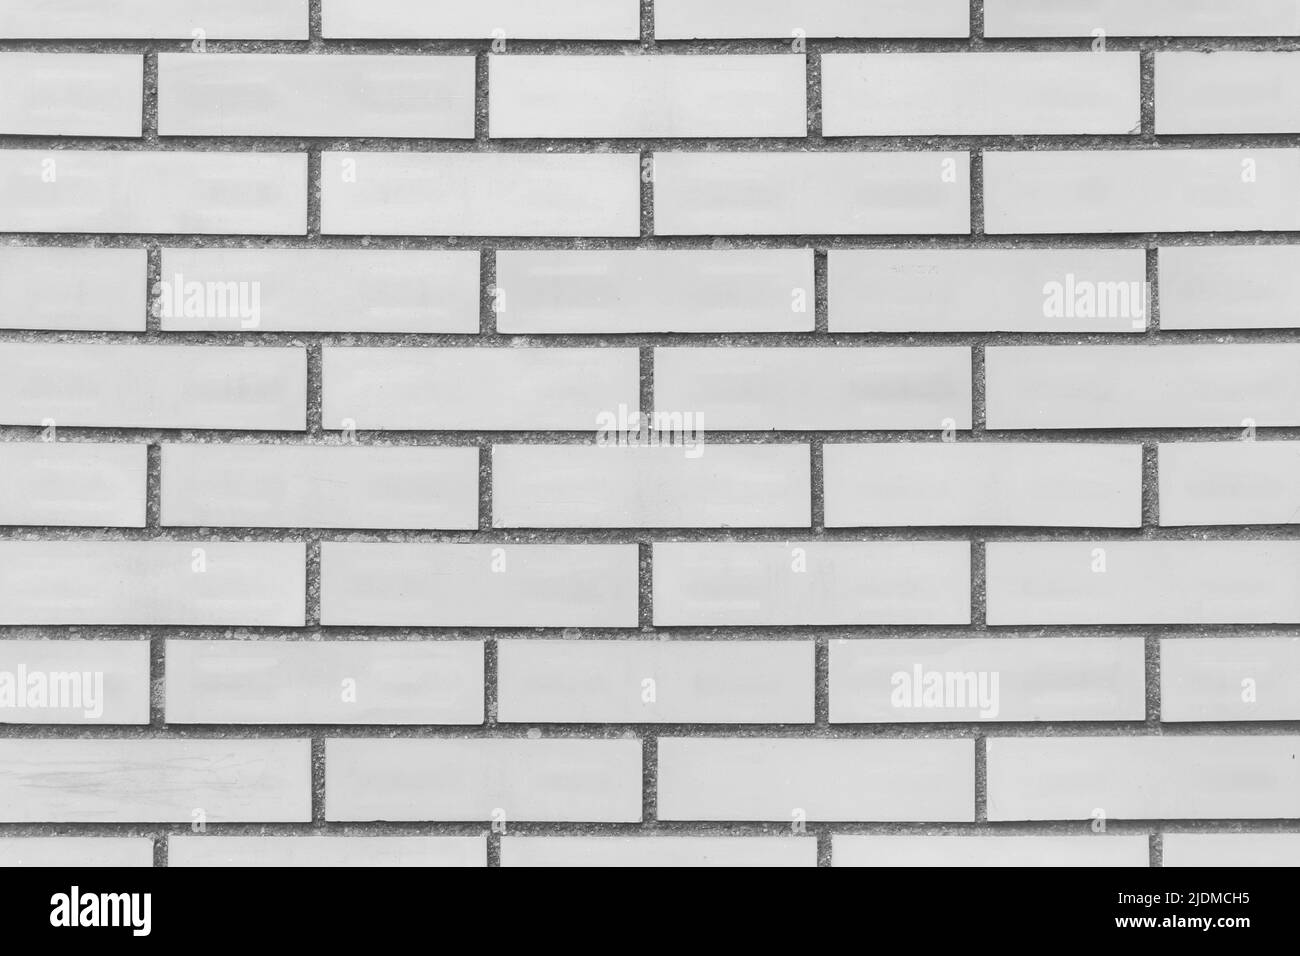 Brick old horizontal wall texture of grey dirty gray color background. Stock Photo